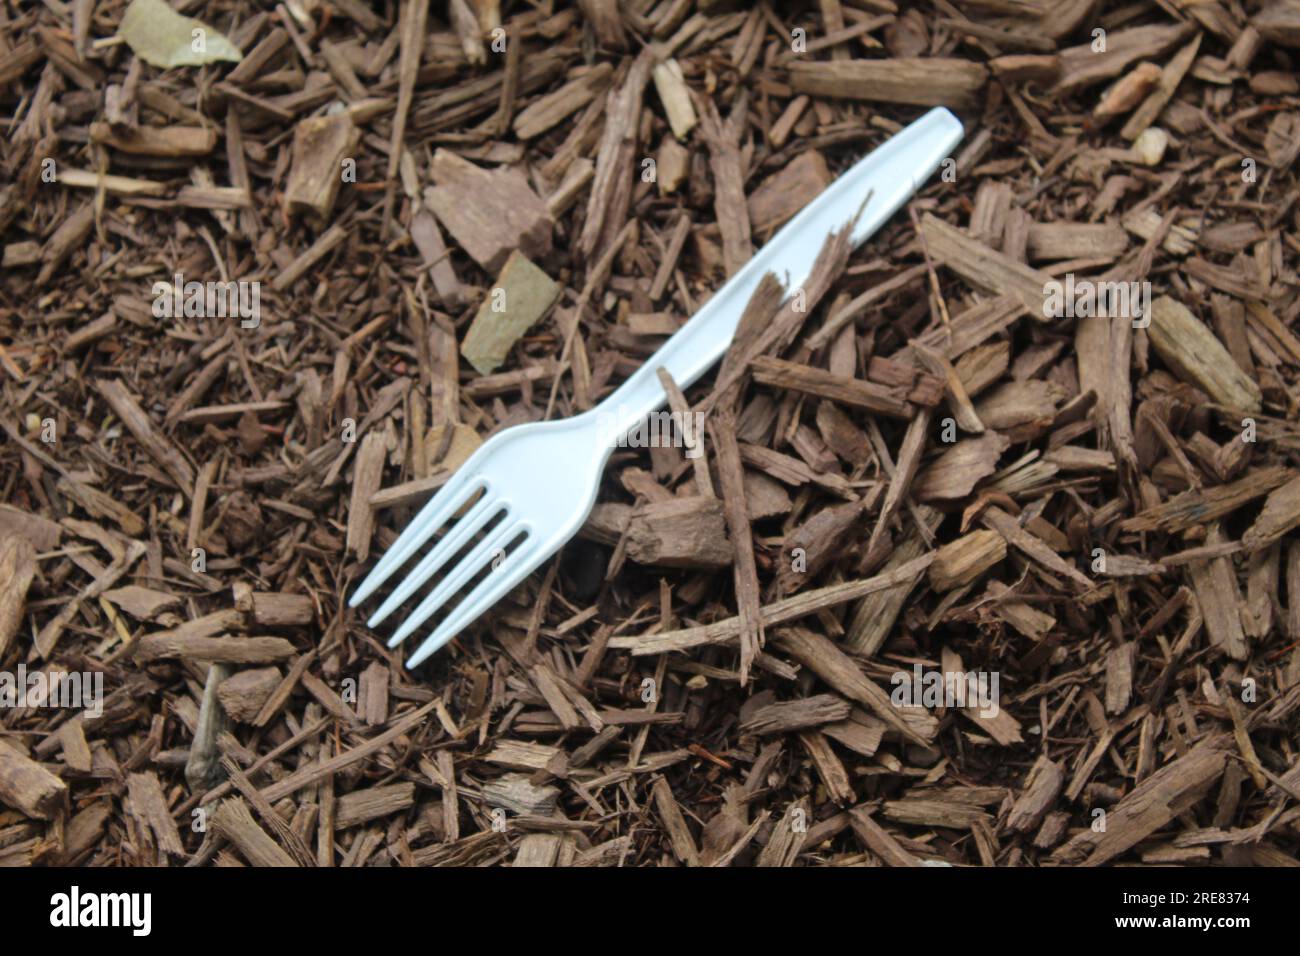 A photo of a fork on a ground of bark and wood. Stock Photo